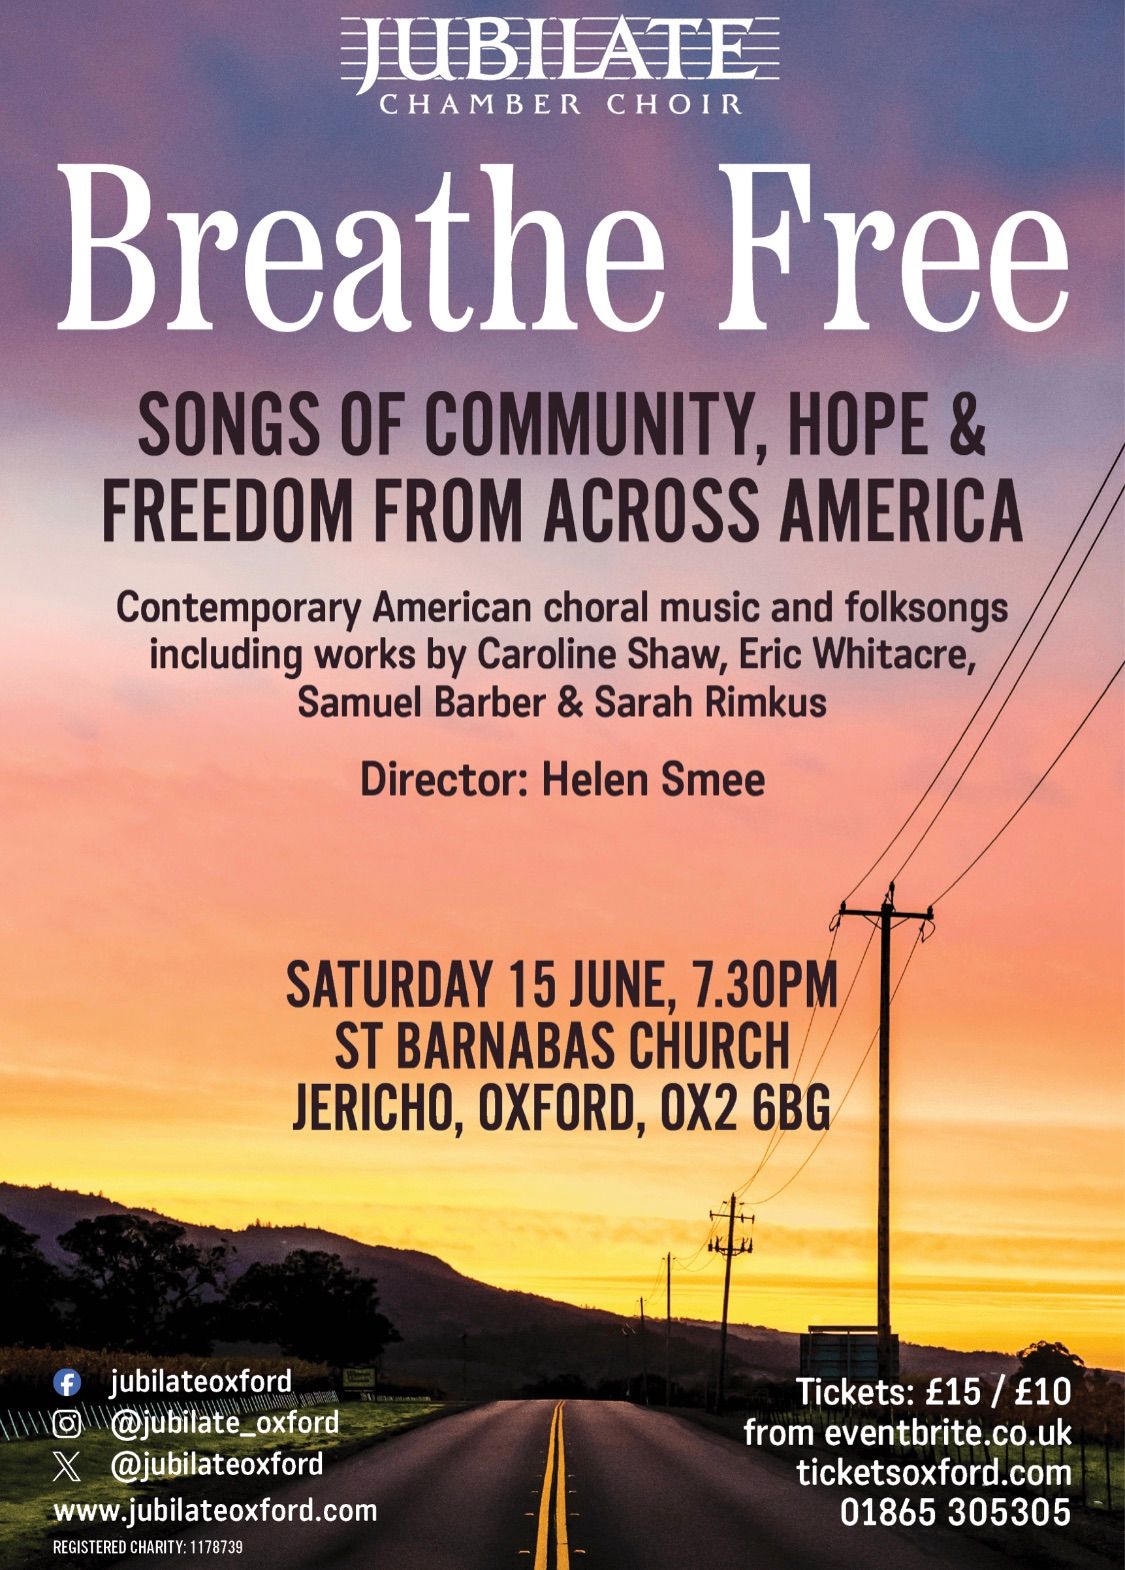 Breathe free - Songs of community, hope, and freedom from across America